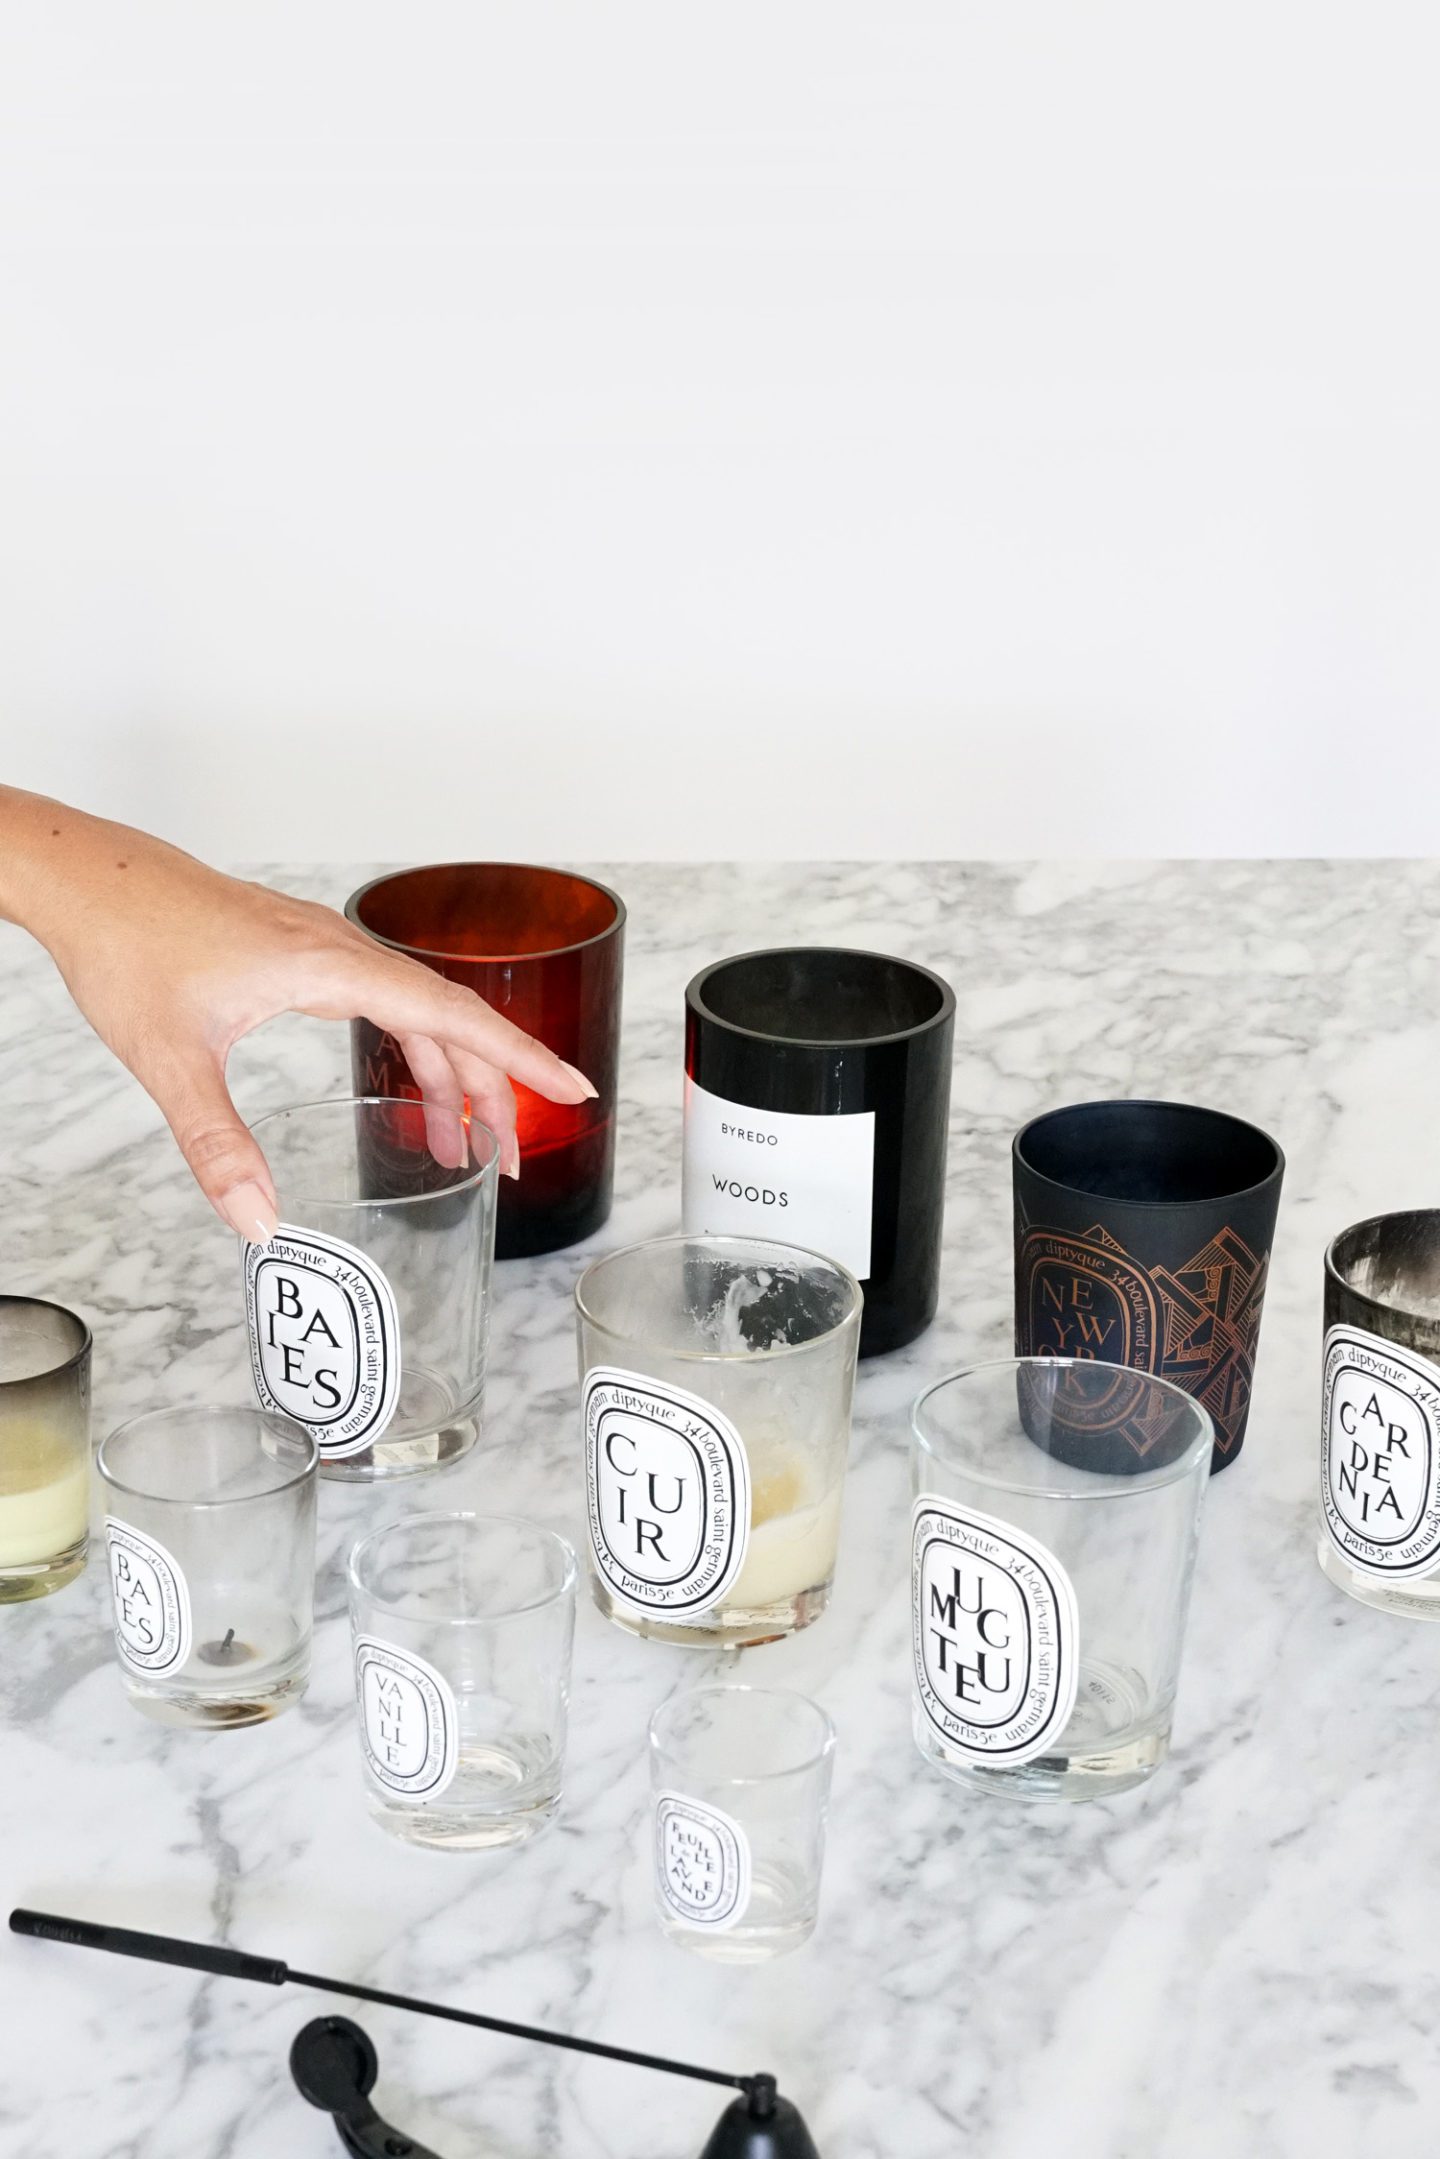 How to Clean out Wax from Diptyque Jars